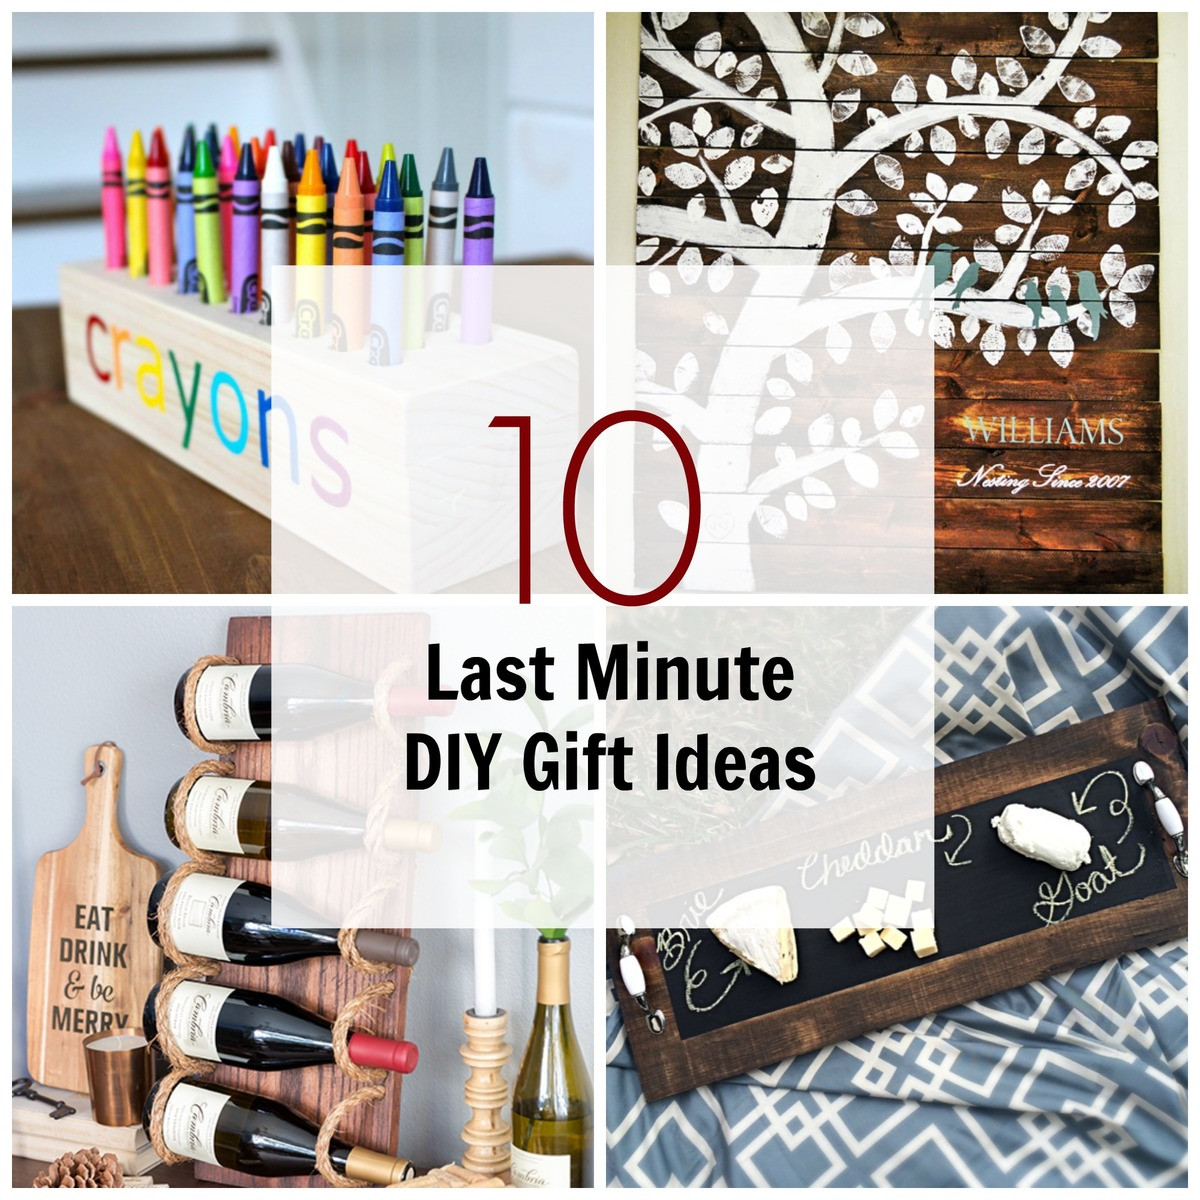 DIY Wood Christmas Gifts
 10 Last Minute DIY Wood Gifts that you Can Make